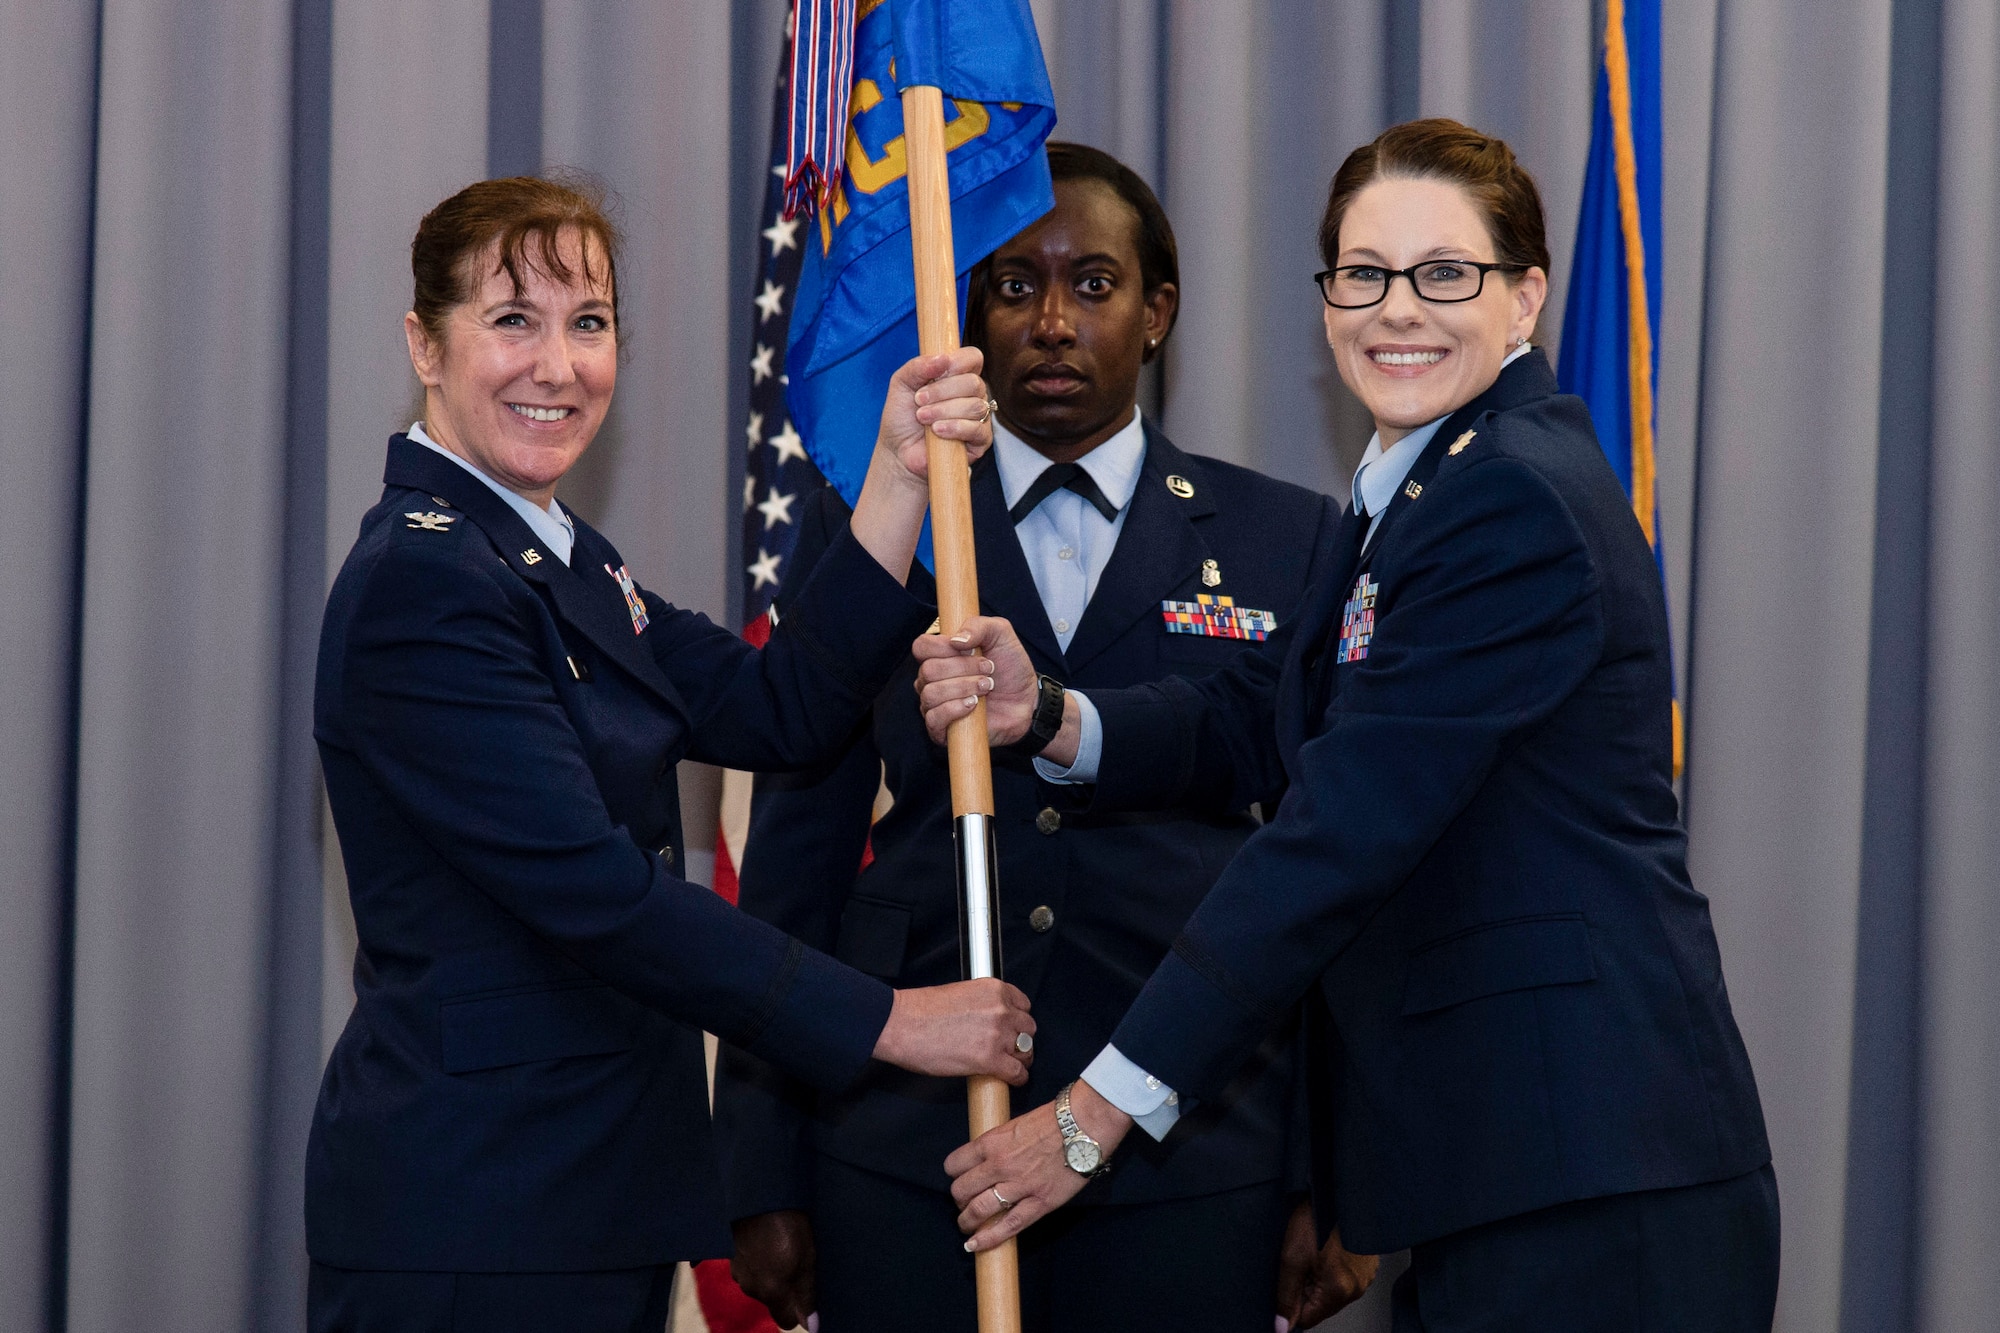 Lt. Col. Sara Spearing, 436th Health Care Operations Squadron commander, right, assumes command of the 436th HCOS after receiving the guidon from Col. Tracy Allen, left, 436th Medical Group commander, during a change of command ceremony held at The Landings on Dover Air Force Base, Delaware, June 9, 2022. The 436th HCOS Change of Command was one of four ceremonies conducted within the 436th MDG. Guidon bearer for the ceremony was Master Sgt. Kimberly Hammonds, center, 436th HCOS superintendent. (U.S. Air Force photo by Roland Balik)